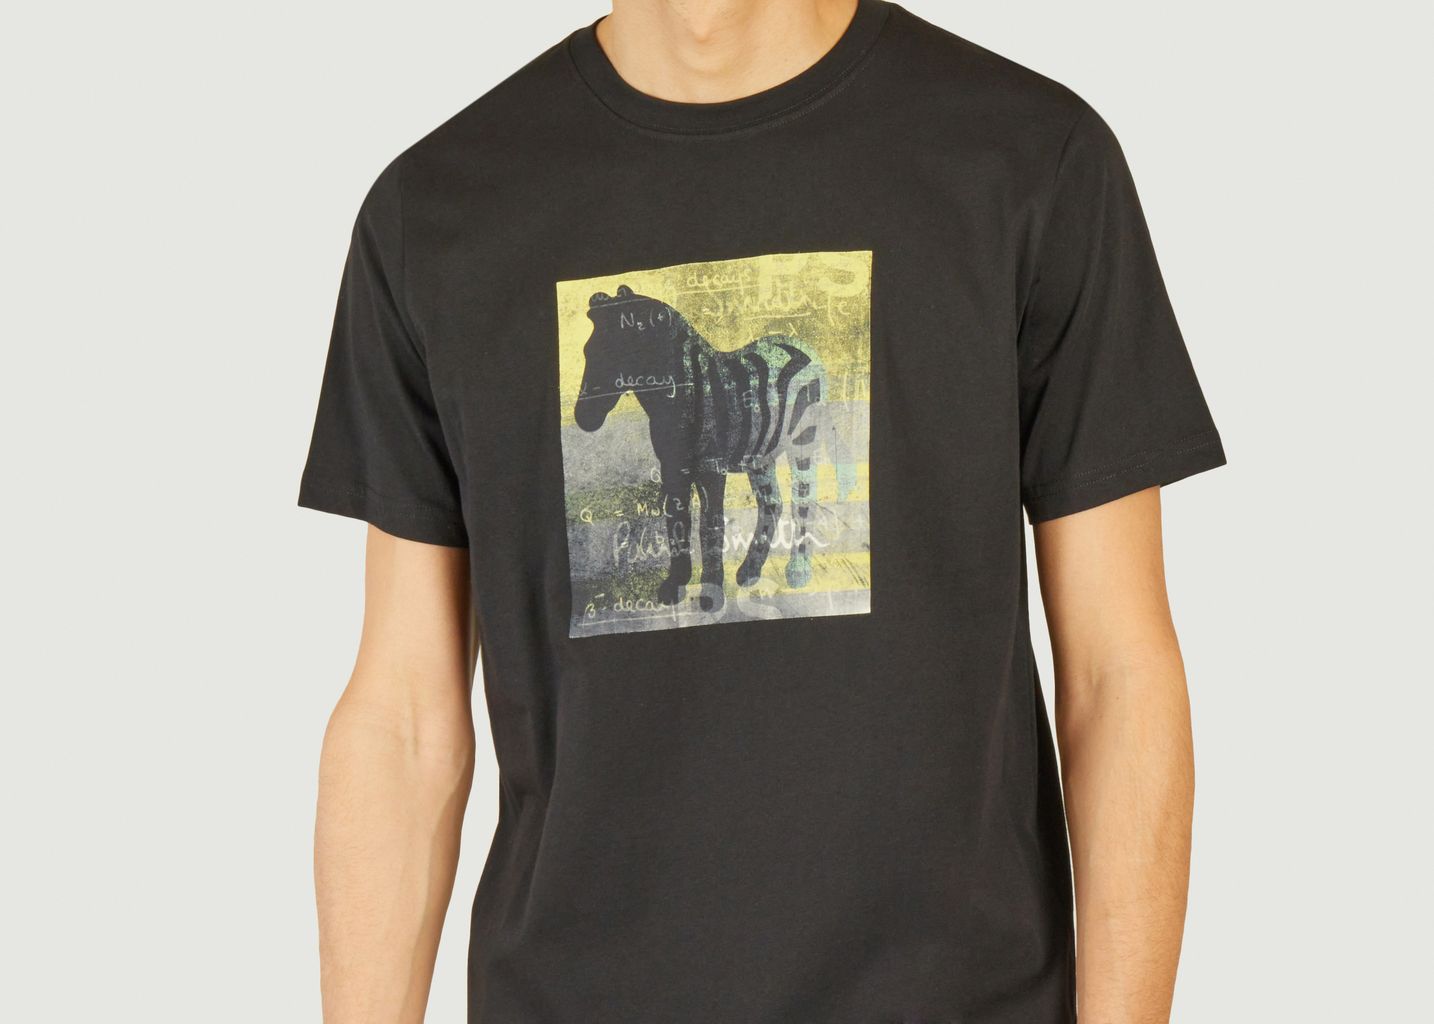 T-Shirt Zebra Square - PS by PAUL SMITH